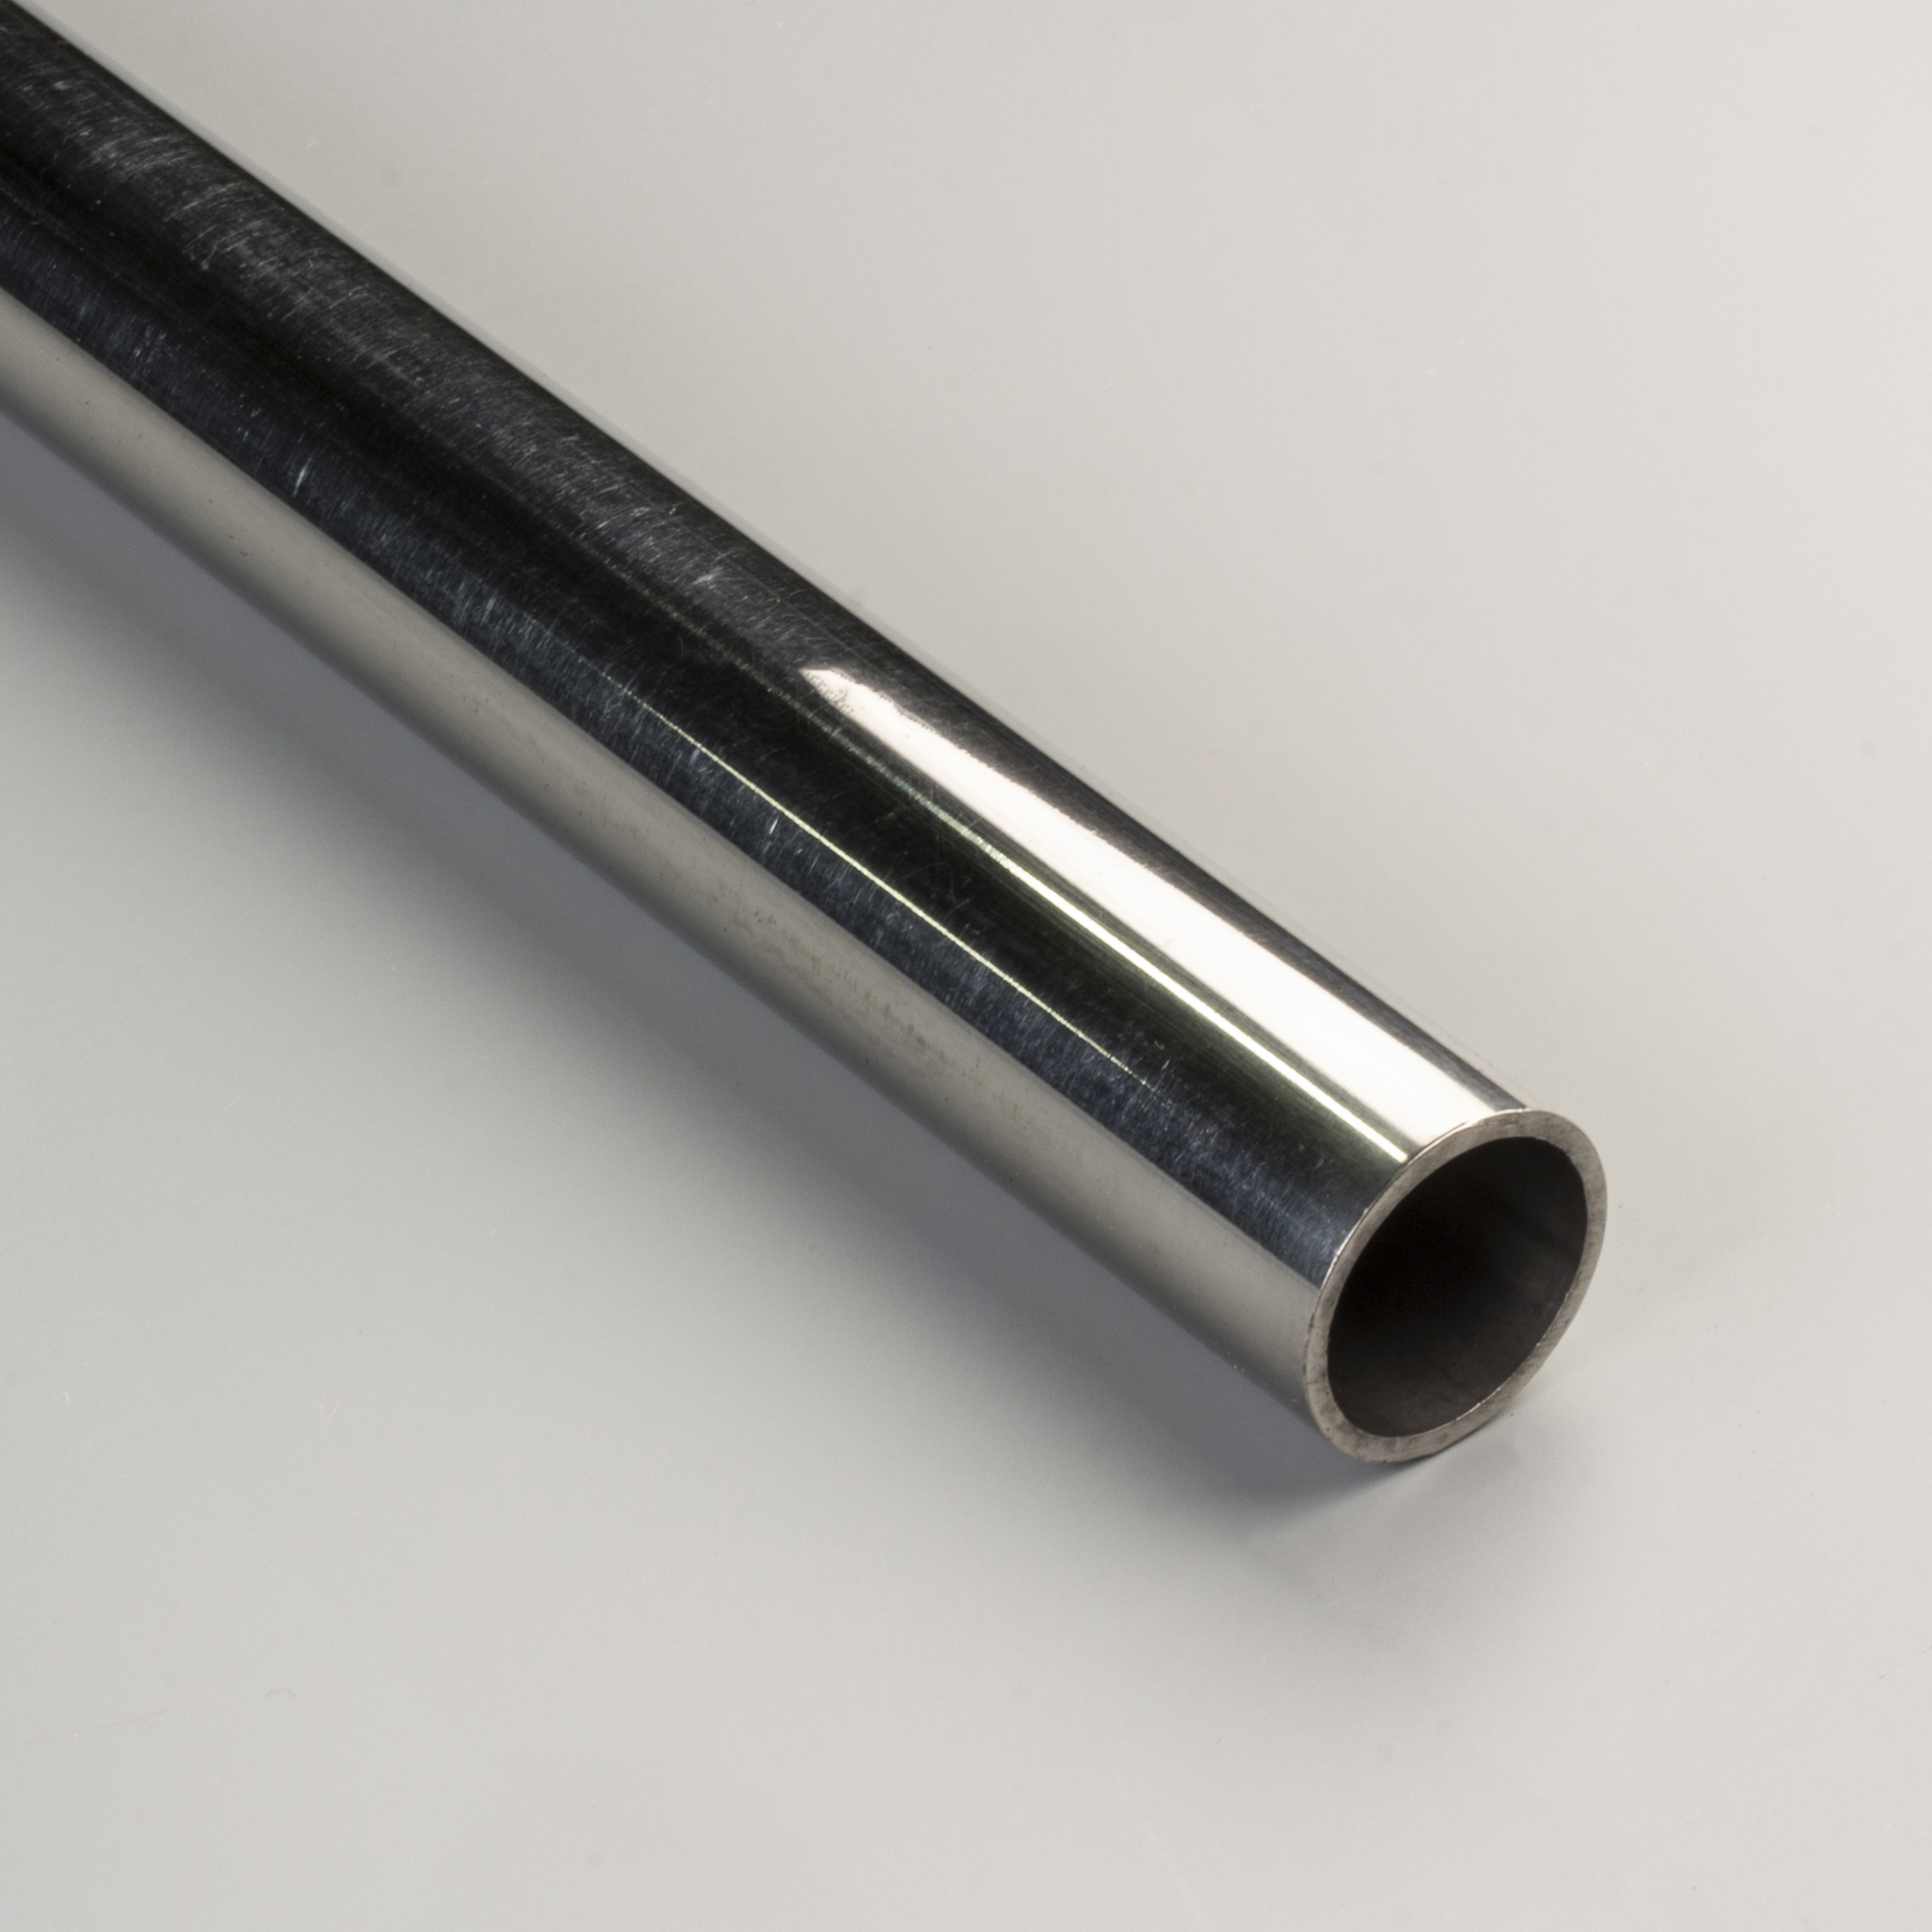 3 8 stainless steel tubing